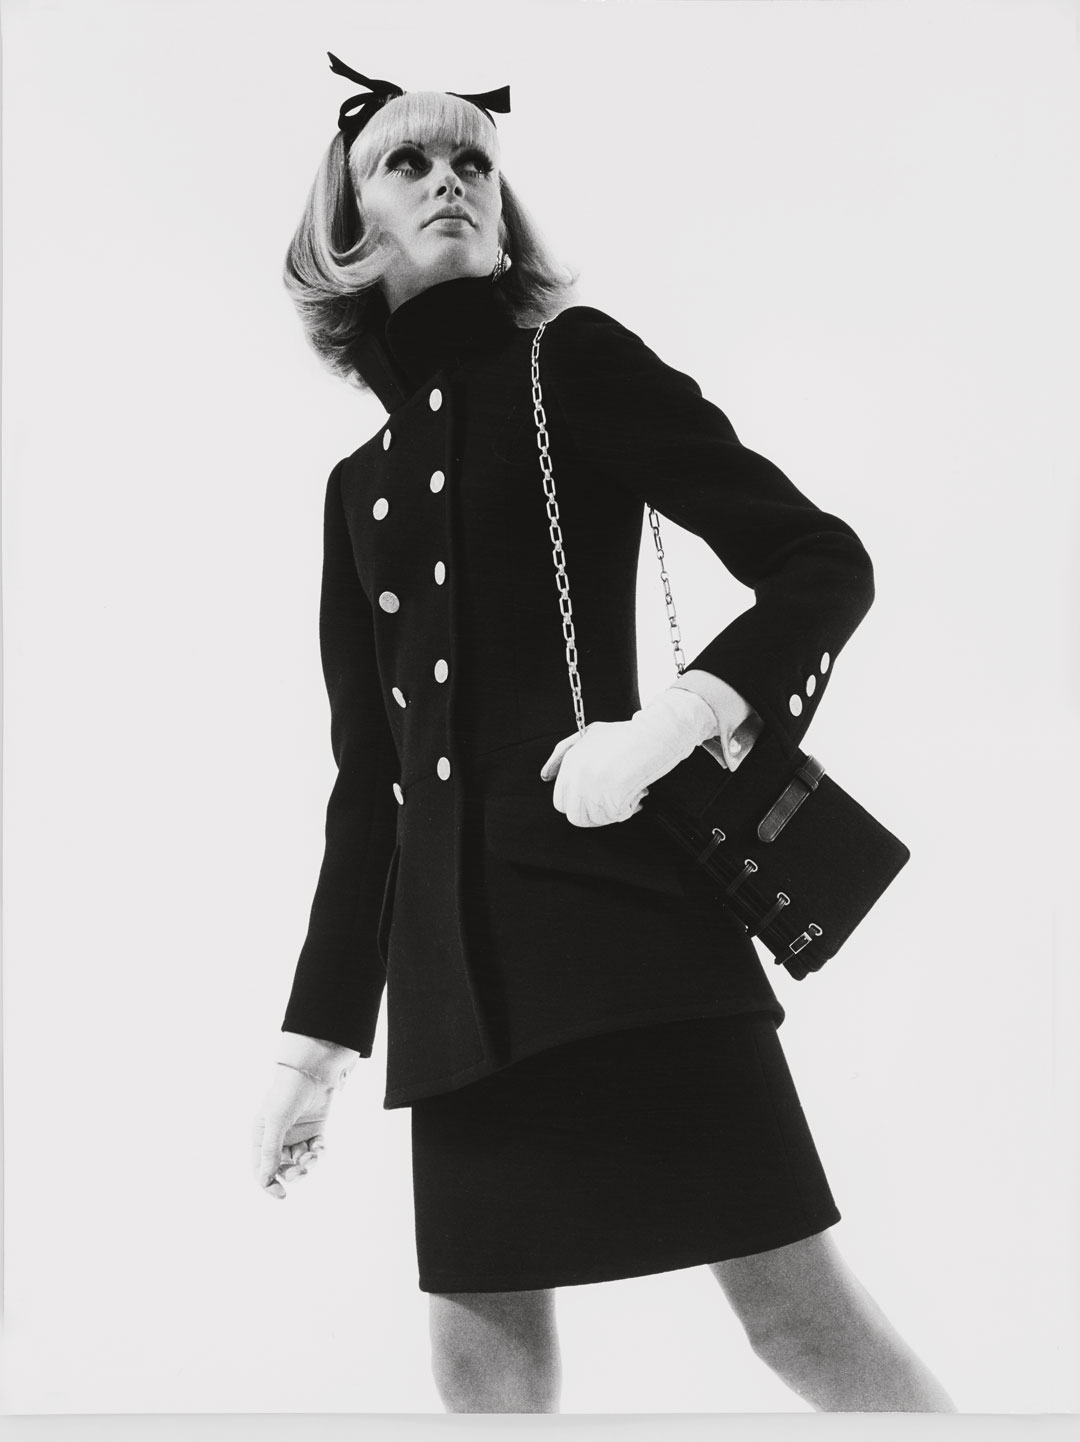 Suede ‘book-bag’, worn with a cocktail suit, Autumn/Winter 1967 haute couture collection. Photograph Peter Caine